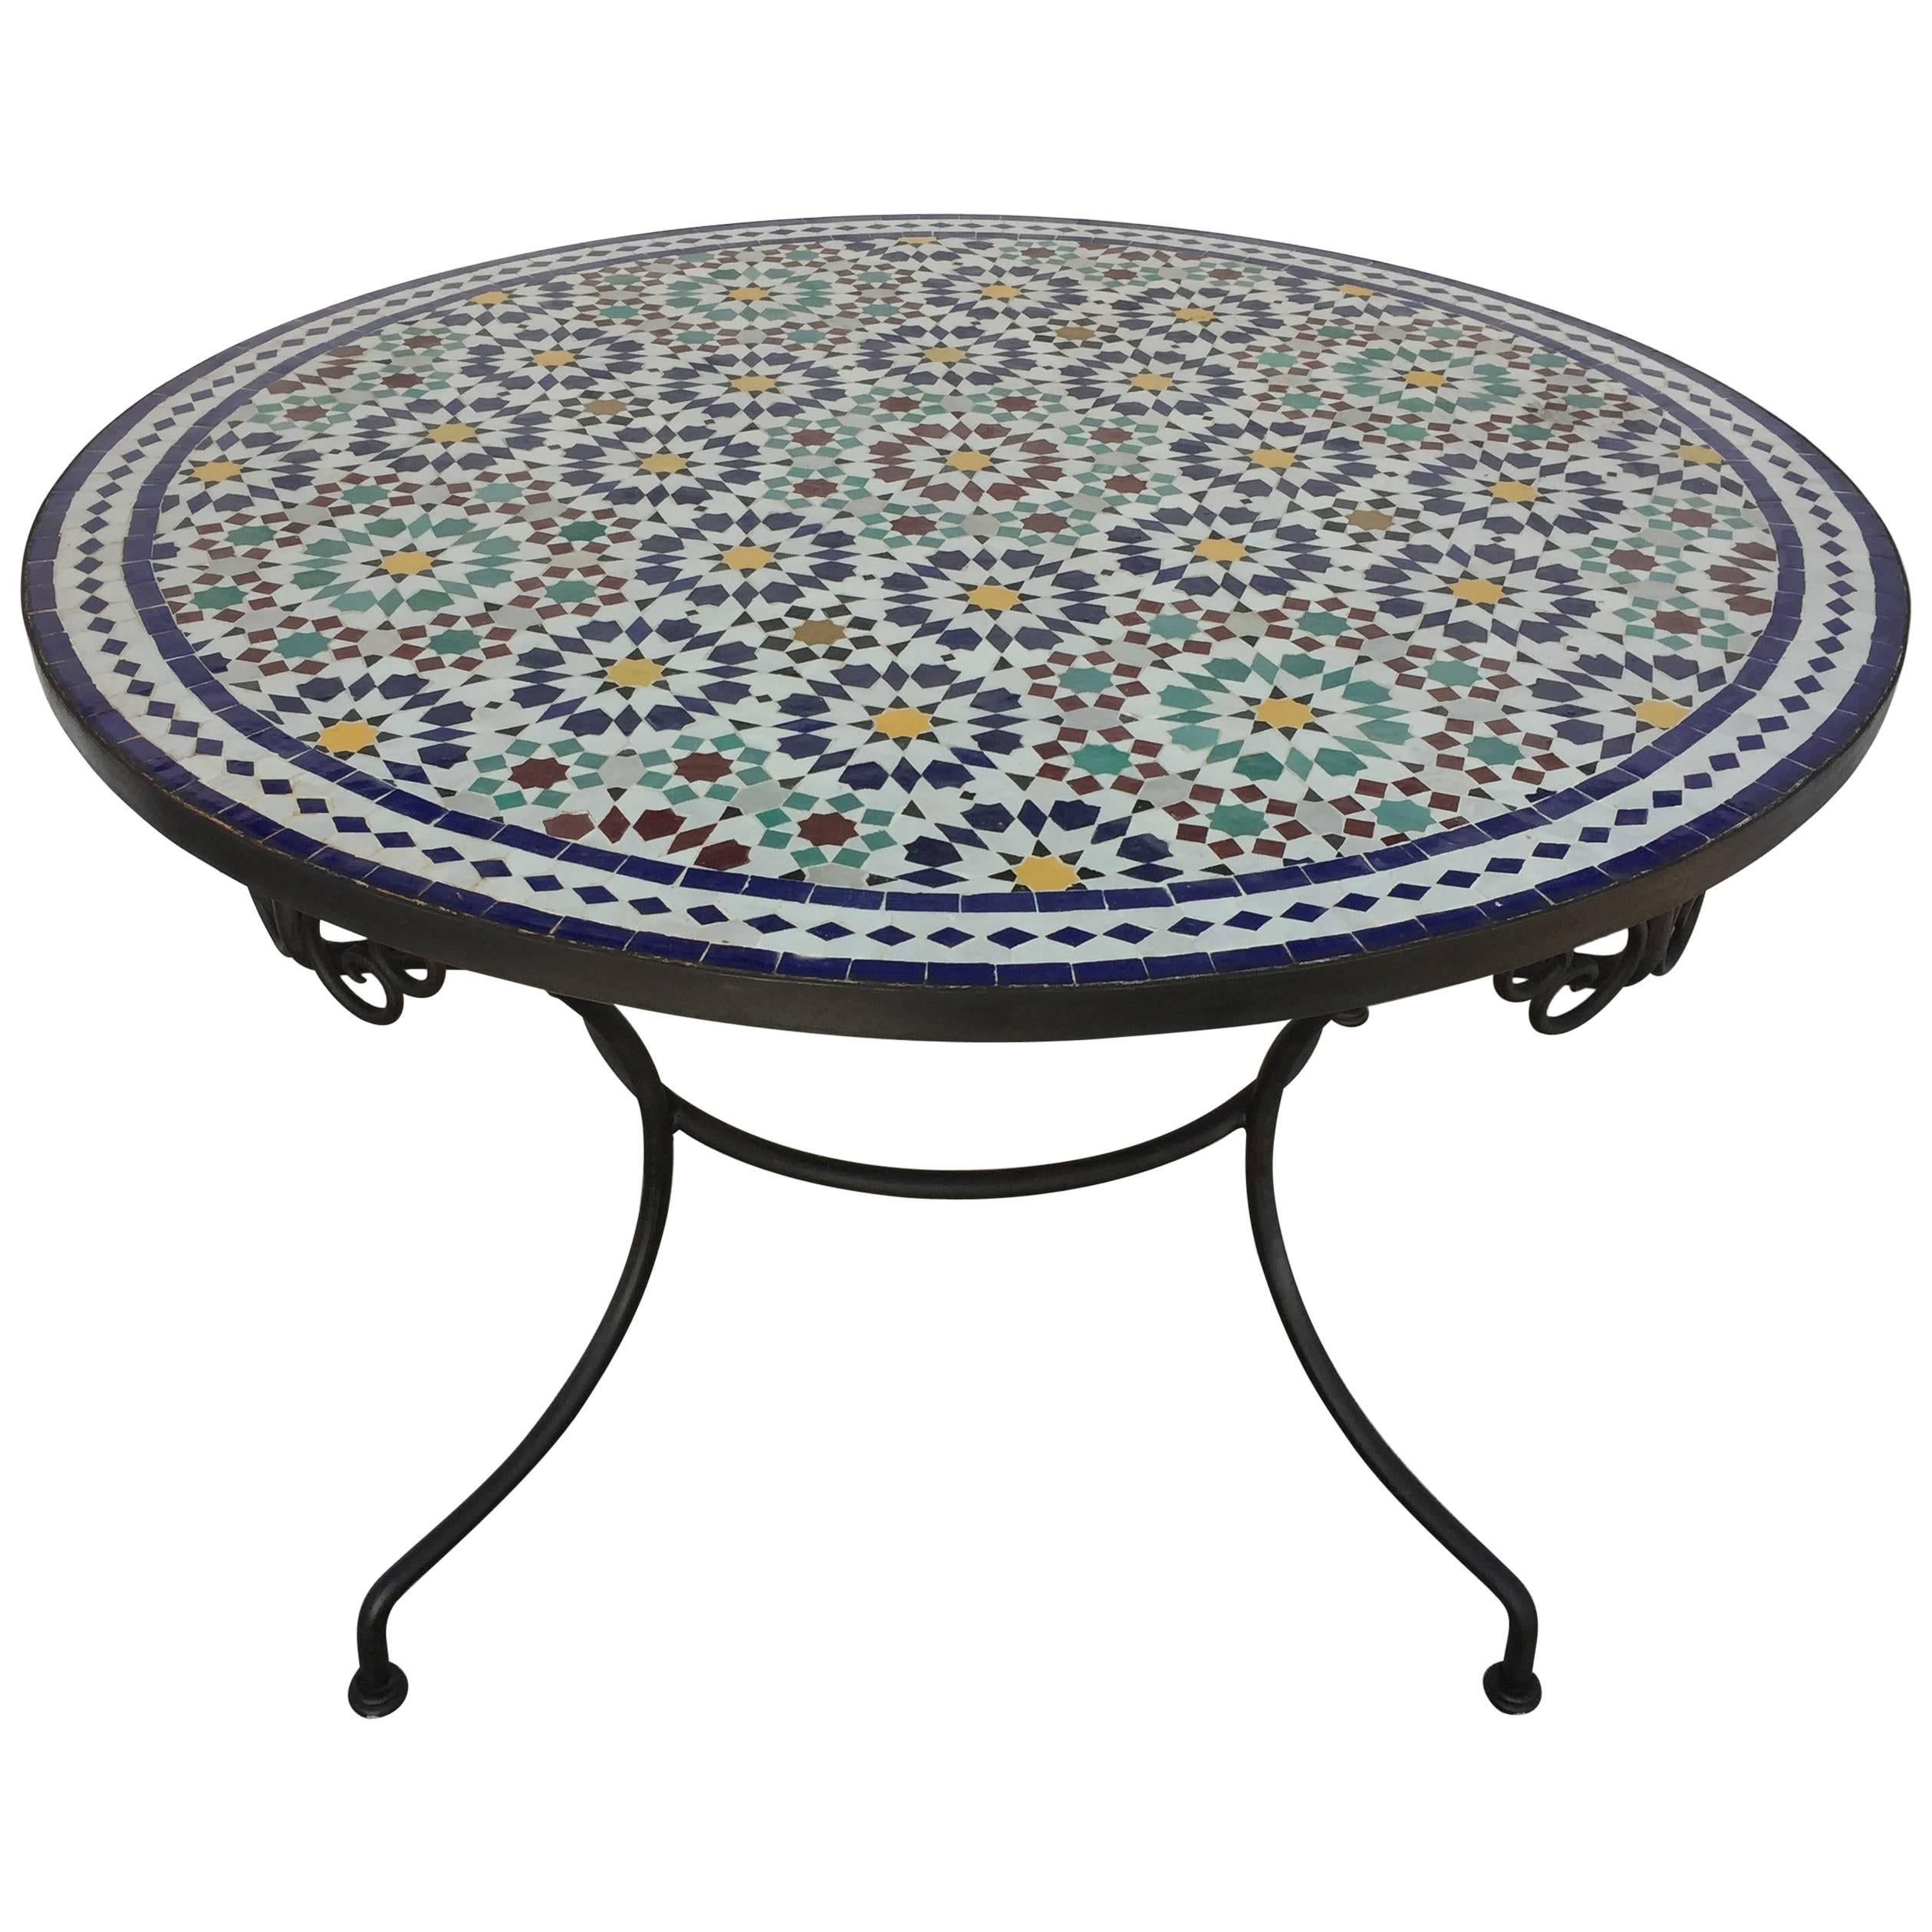 Round Mosaic Outdoor Table Spain, SAVE 51% - mpgc.net